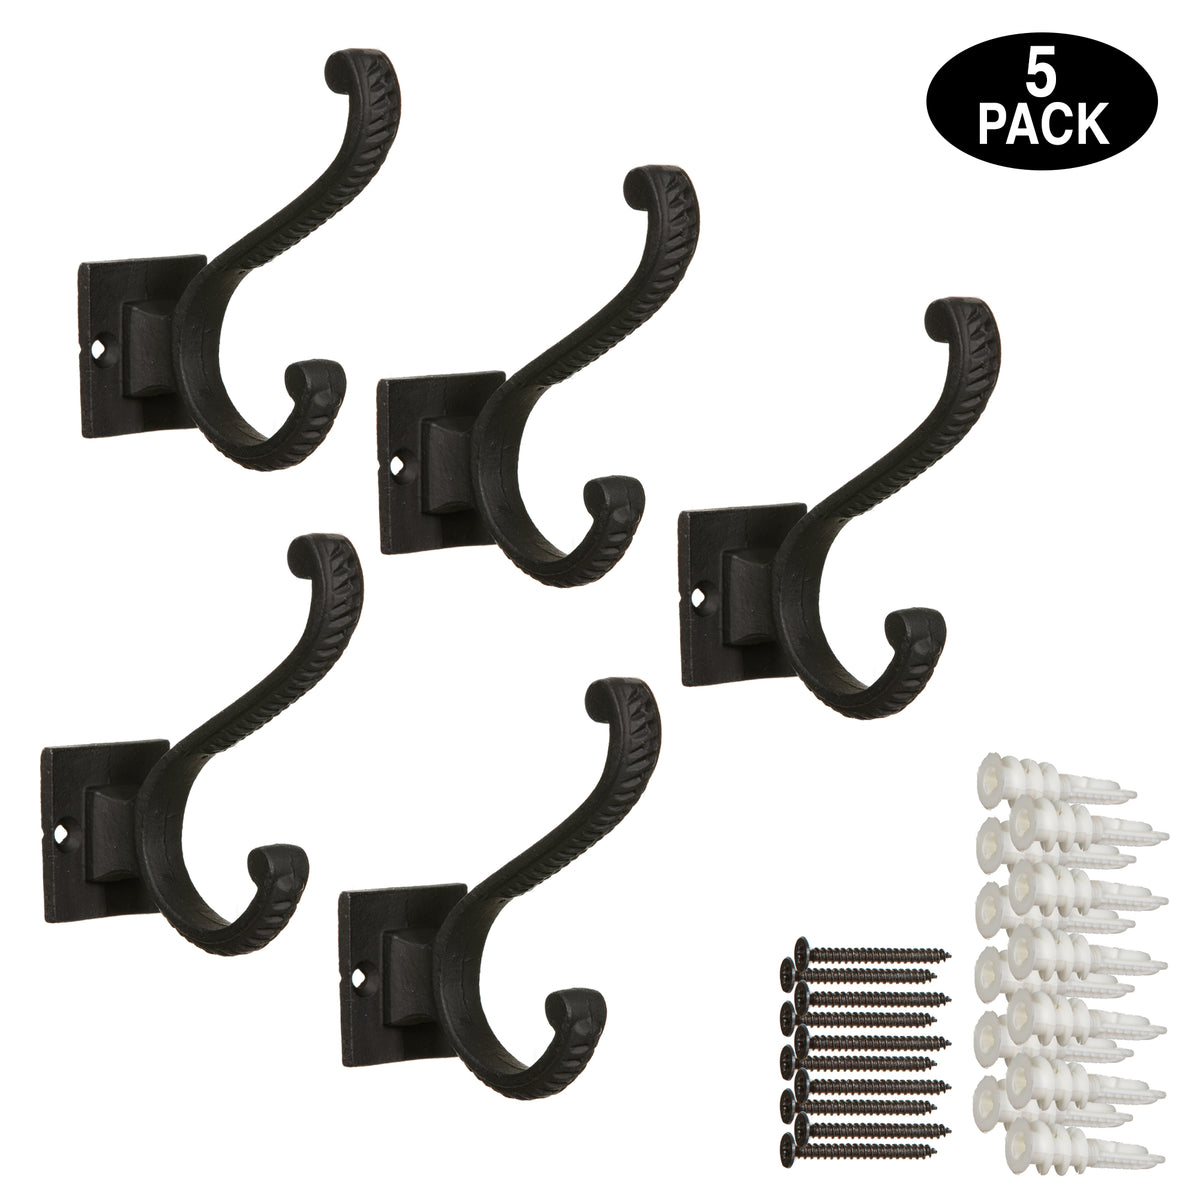 Cast Iron Coat Hooks with Screws, Wall Mounted, Vintage Design